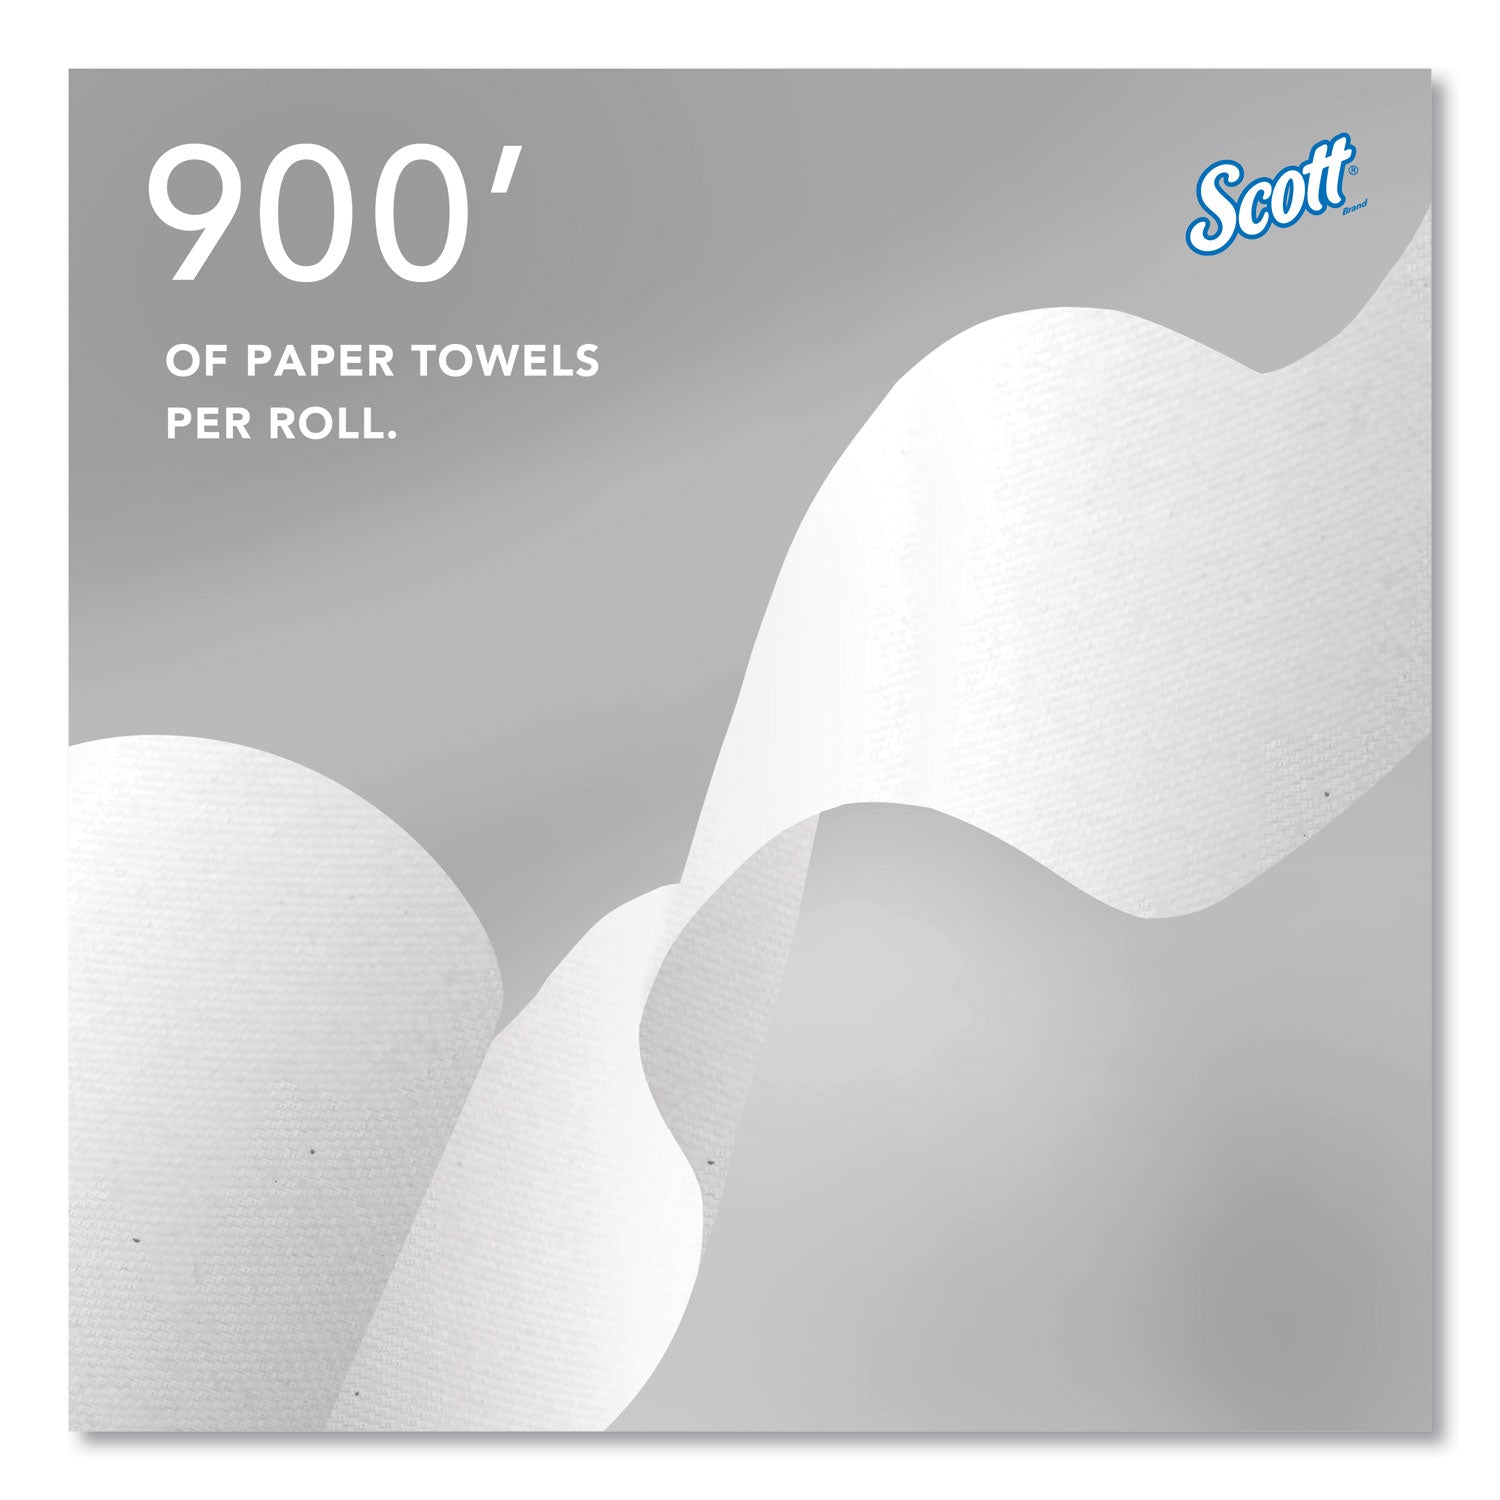 pro-hard-roll-paper-towels-with-absorbency-pockets-for-scott-pro-dispenser-blue-core-only-1-ply-75-x-900-ft-6-rolls-ct_kcc43959 - 8